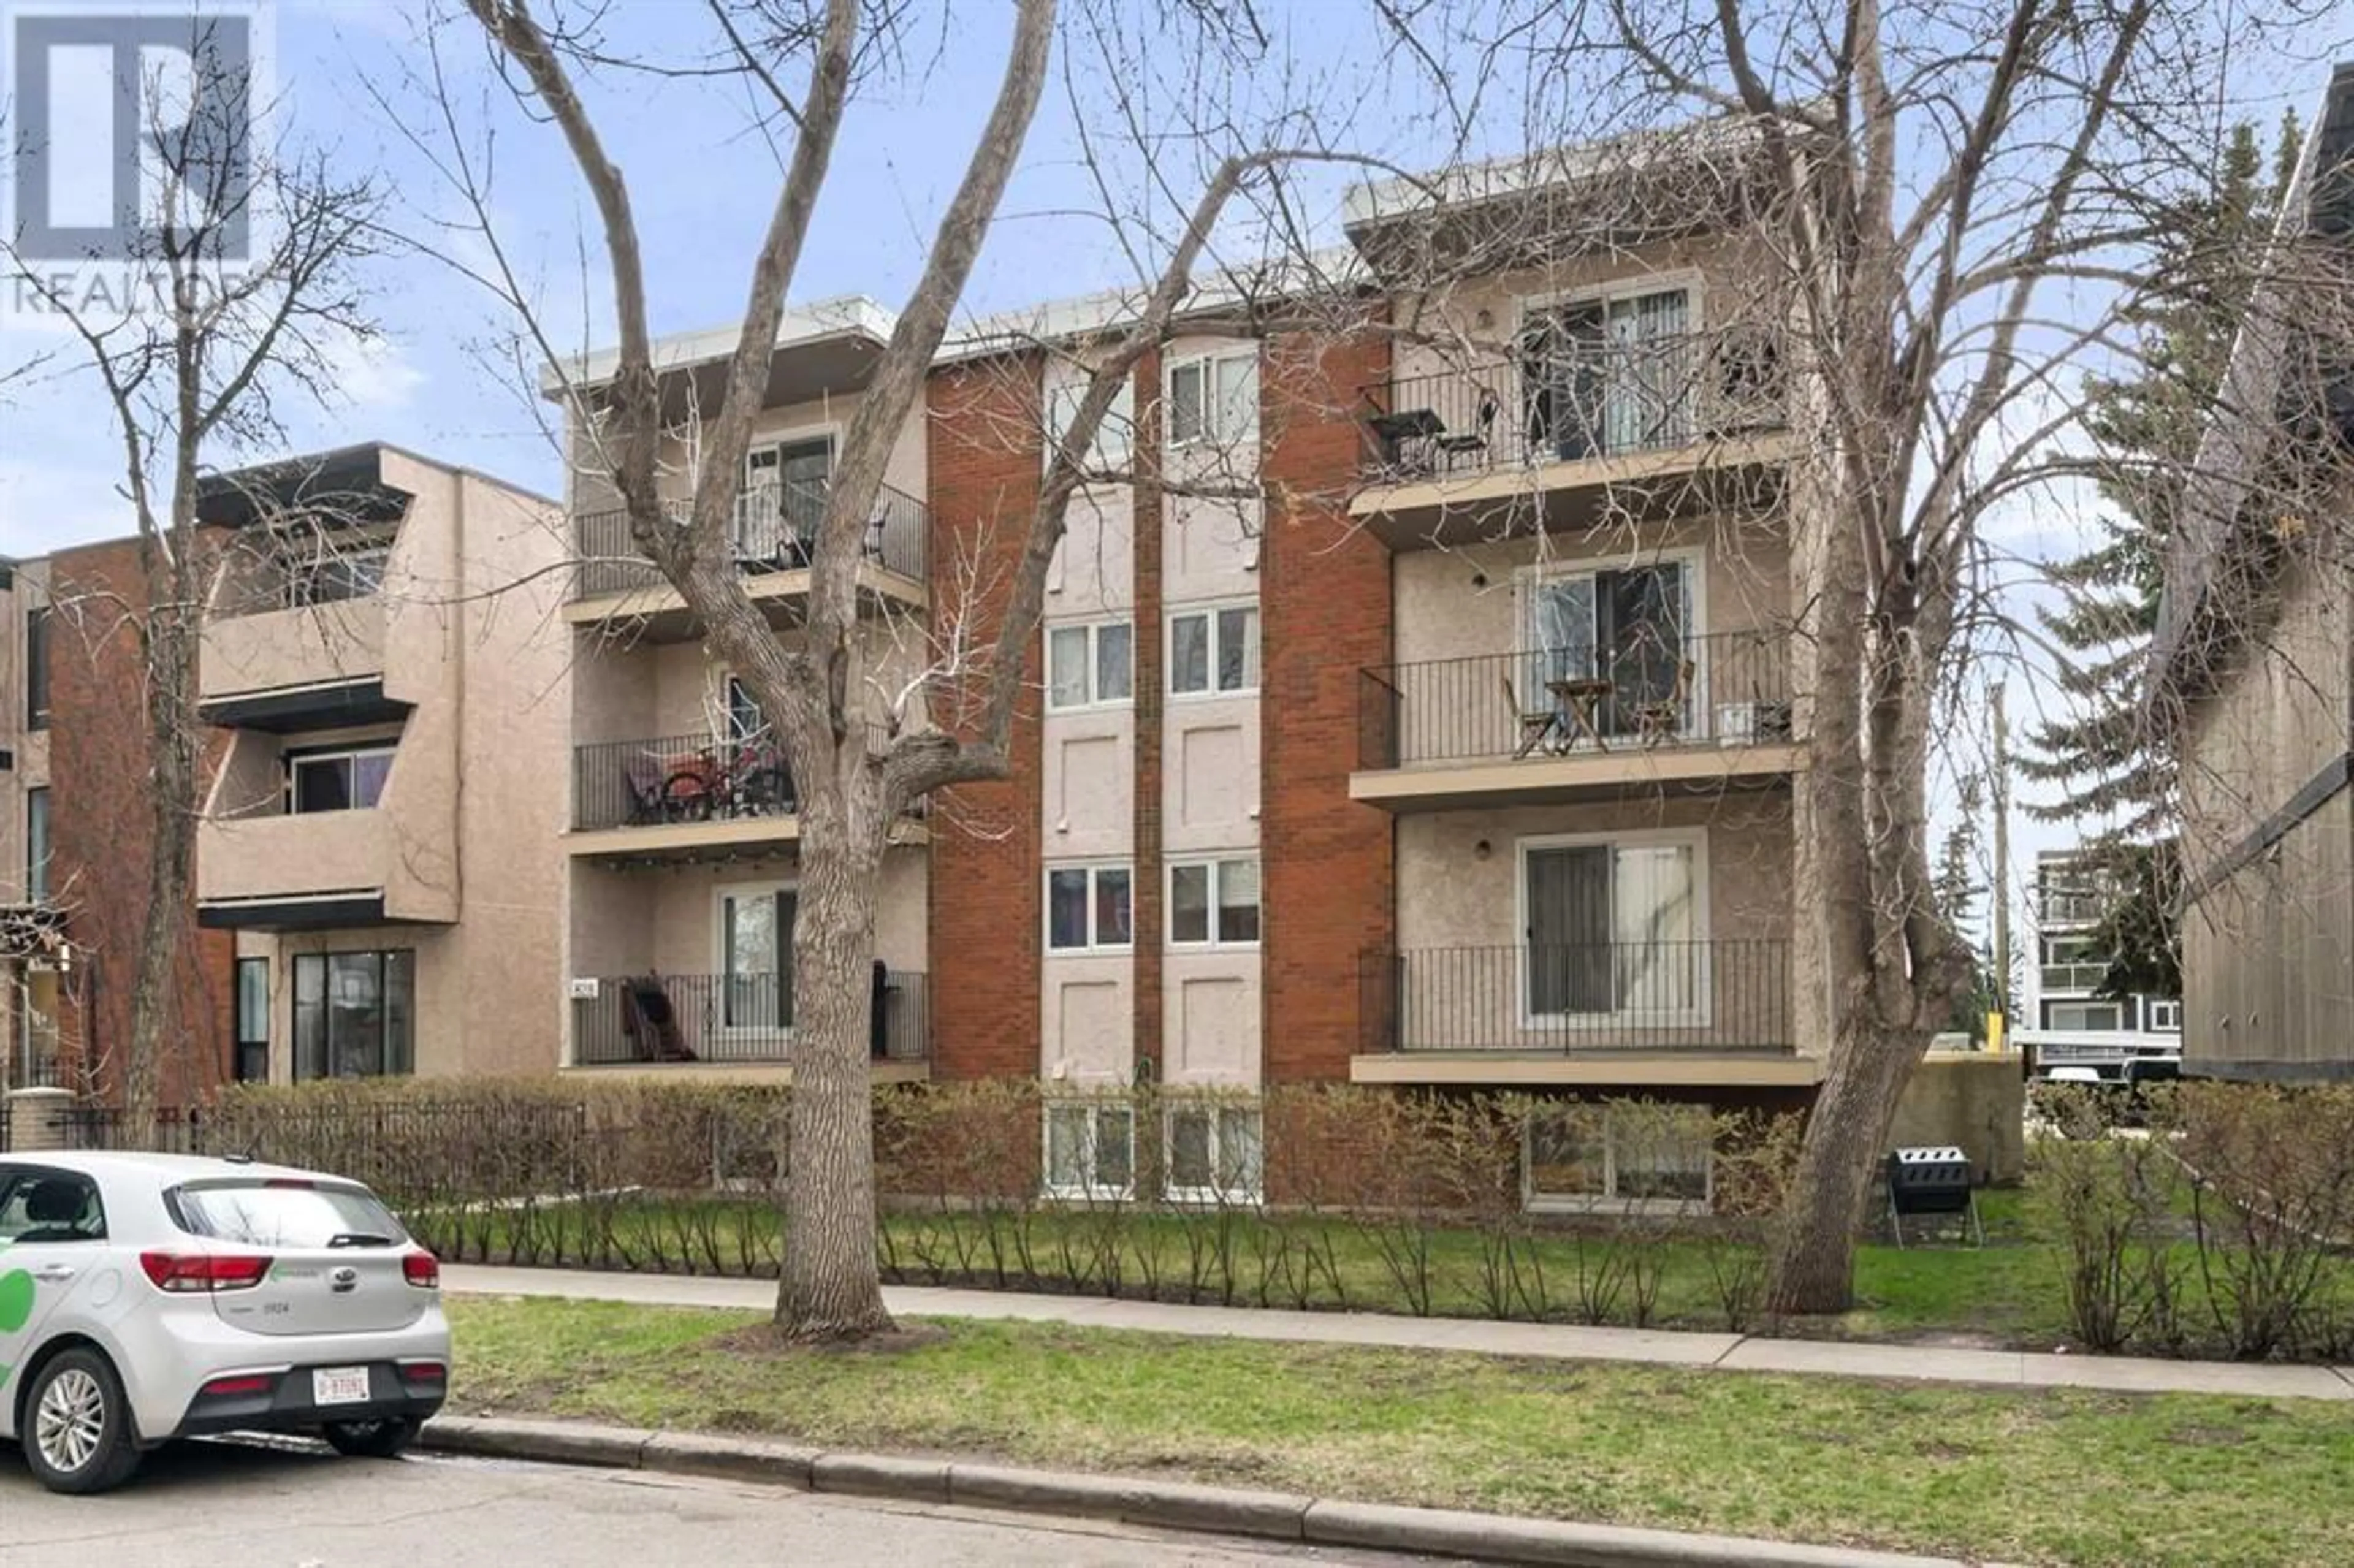 A pic from exterior of the house or condo for 304 828 4A Street NE, Calgary Alberta T2E3W4